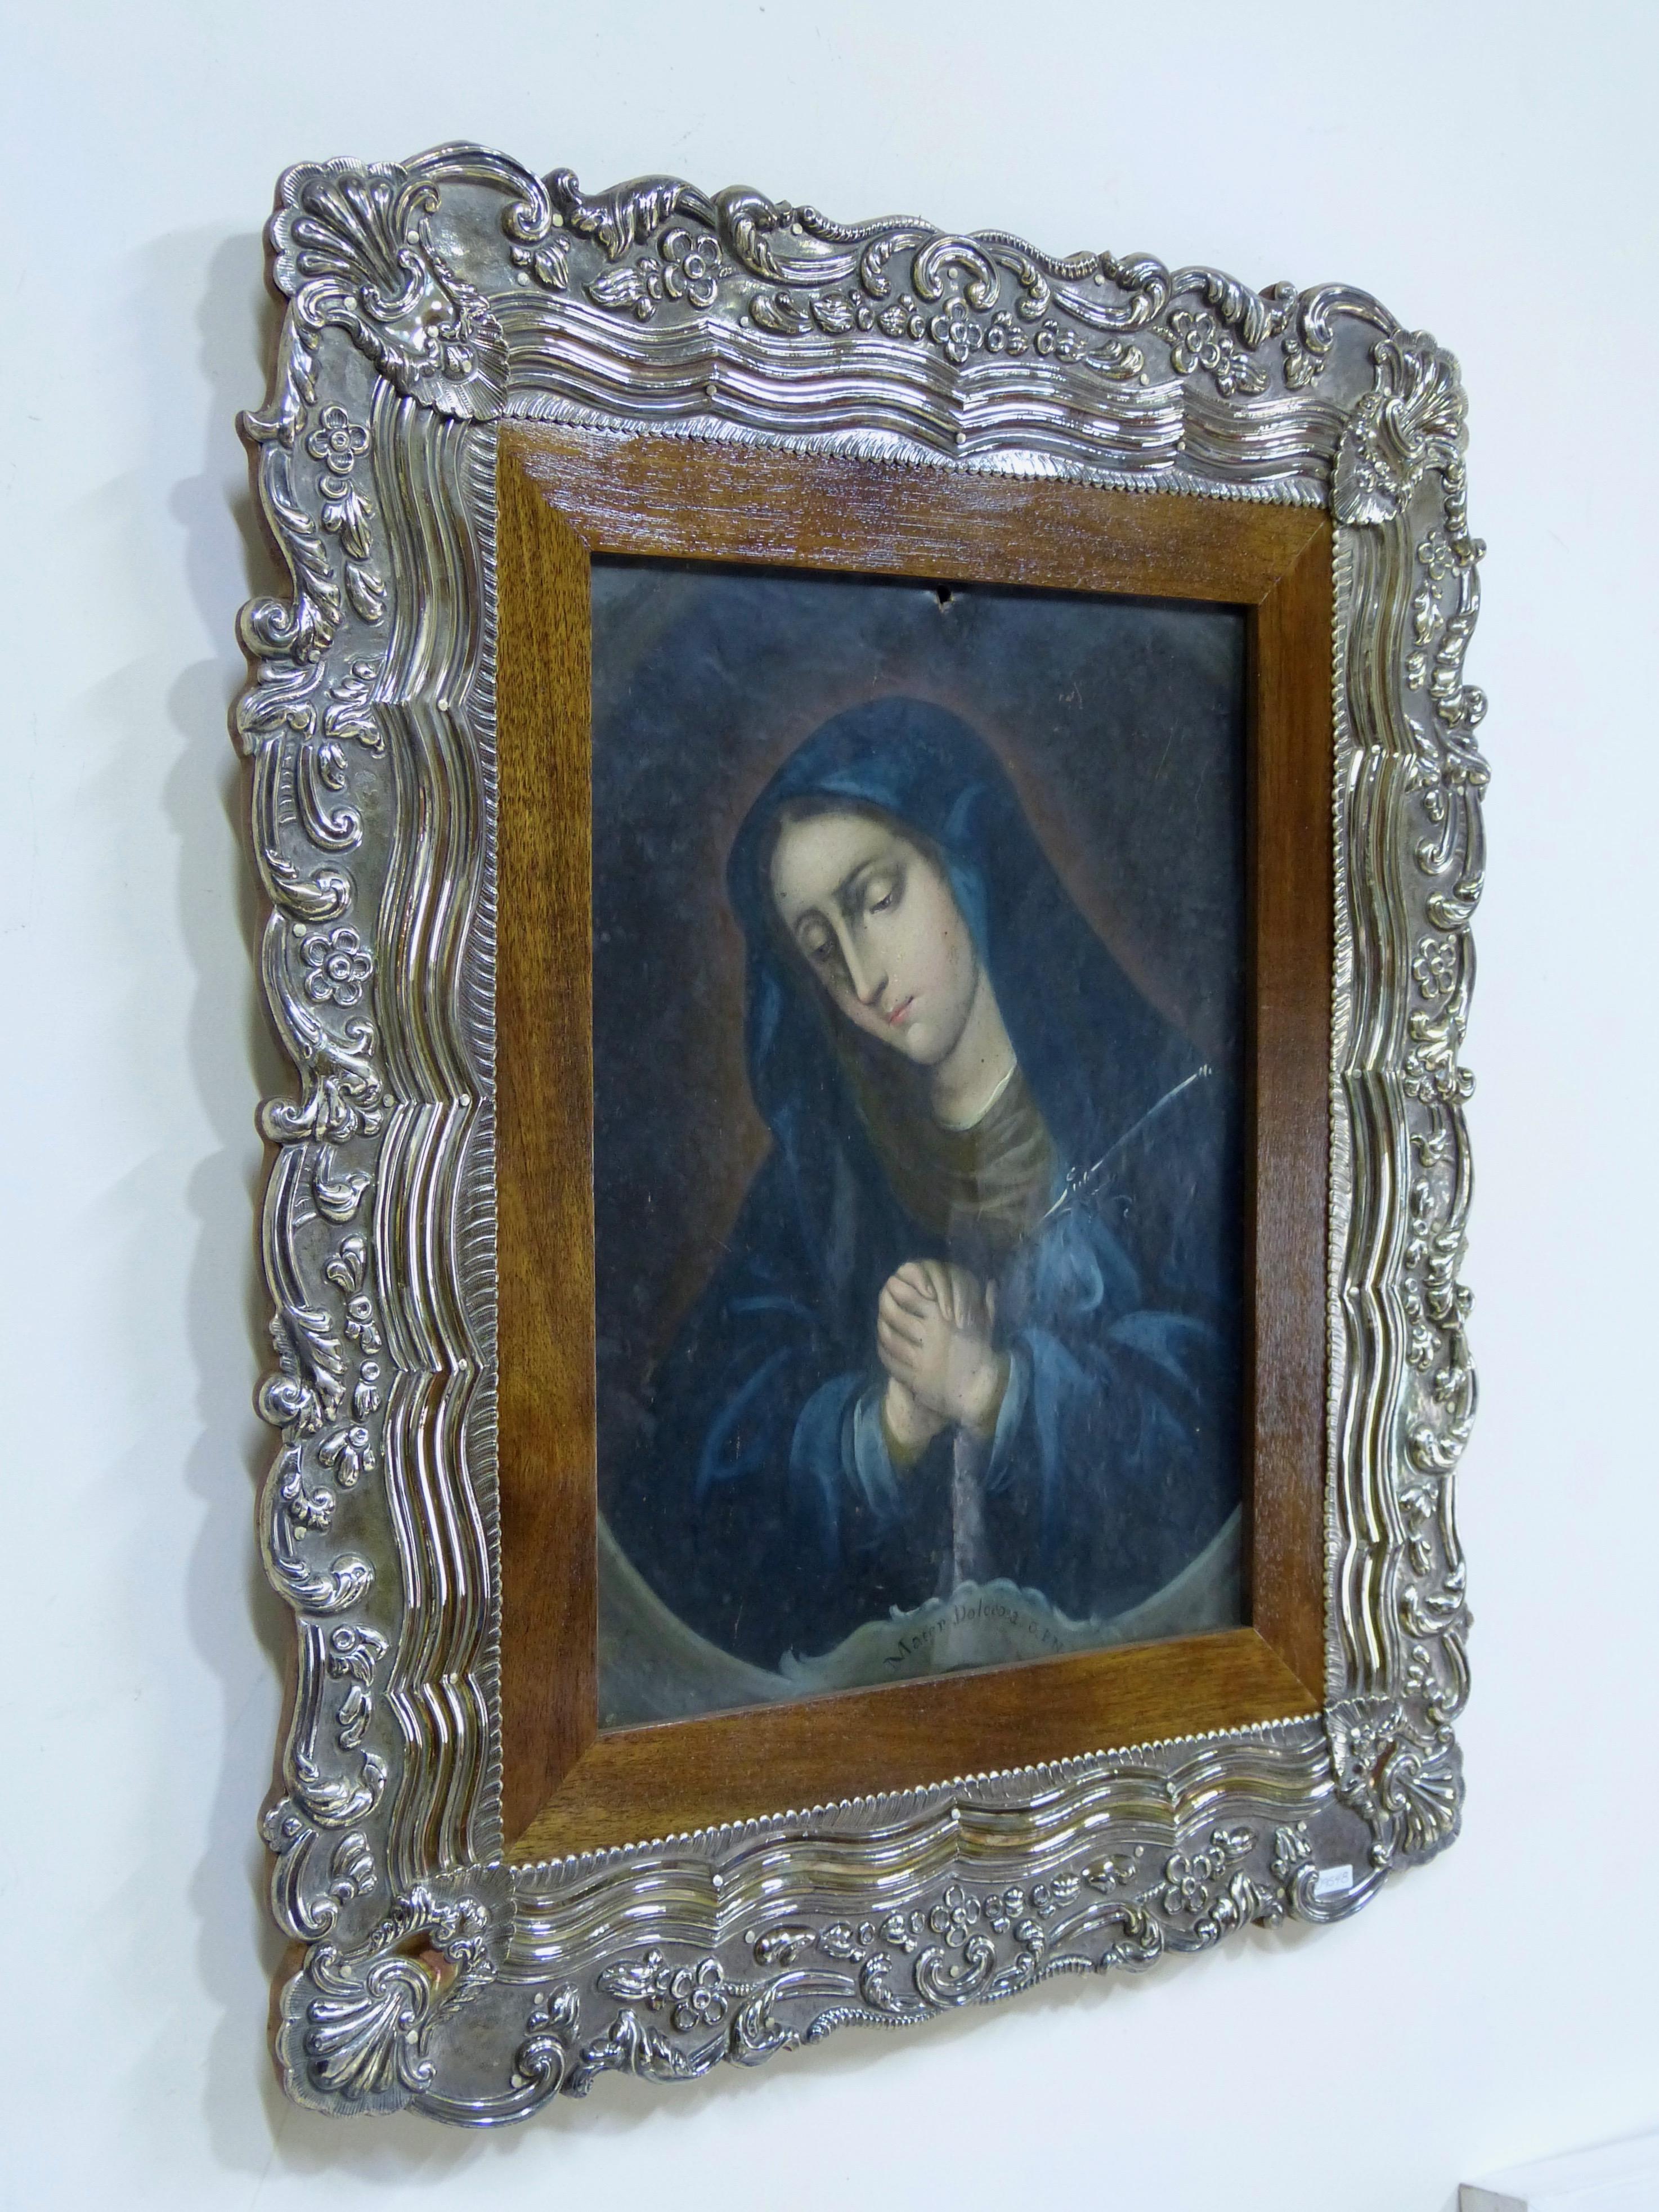 Antique Spanish colonial oil on copper retablo painting of virgin dolorosa
Original from 18th century, not signed
Sterling silver 0.925 colonial style frame
Measures without frame 14 1/4